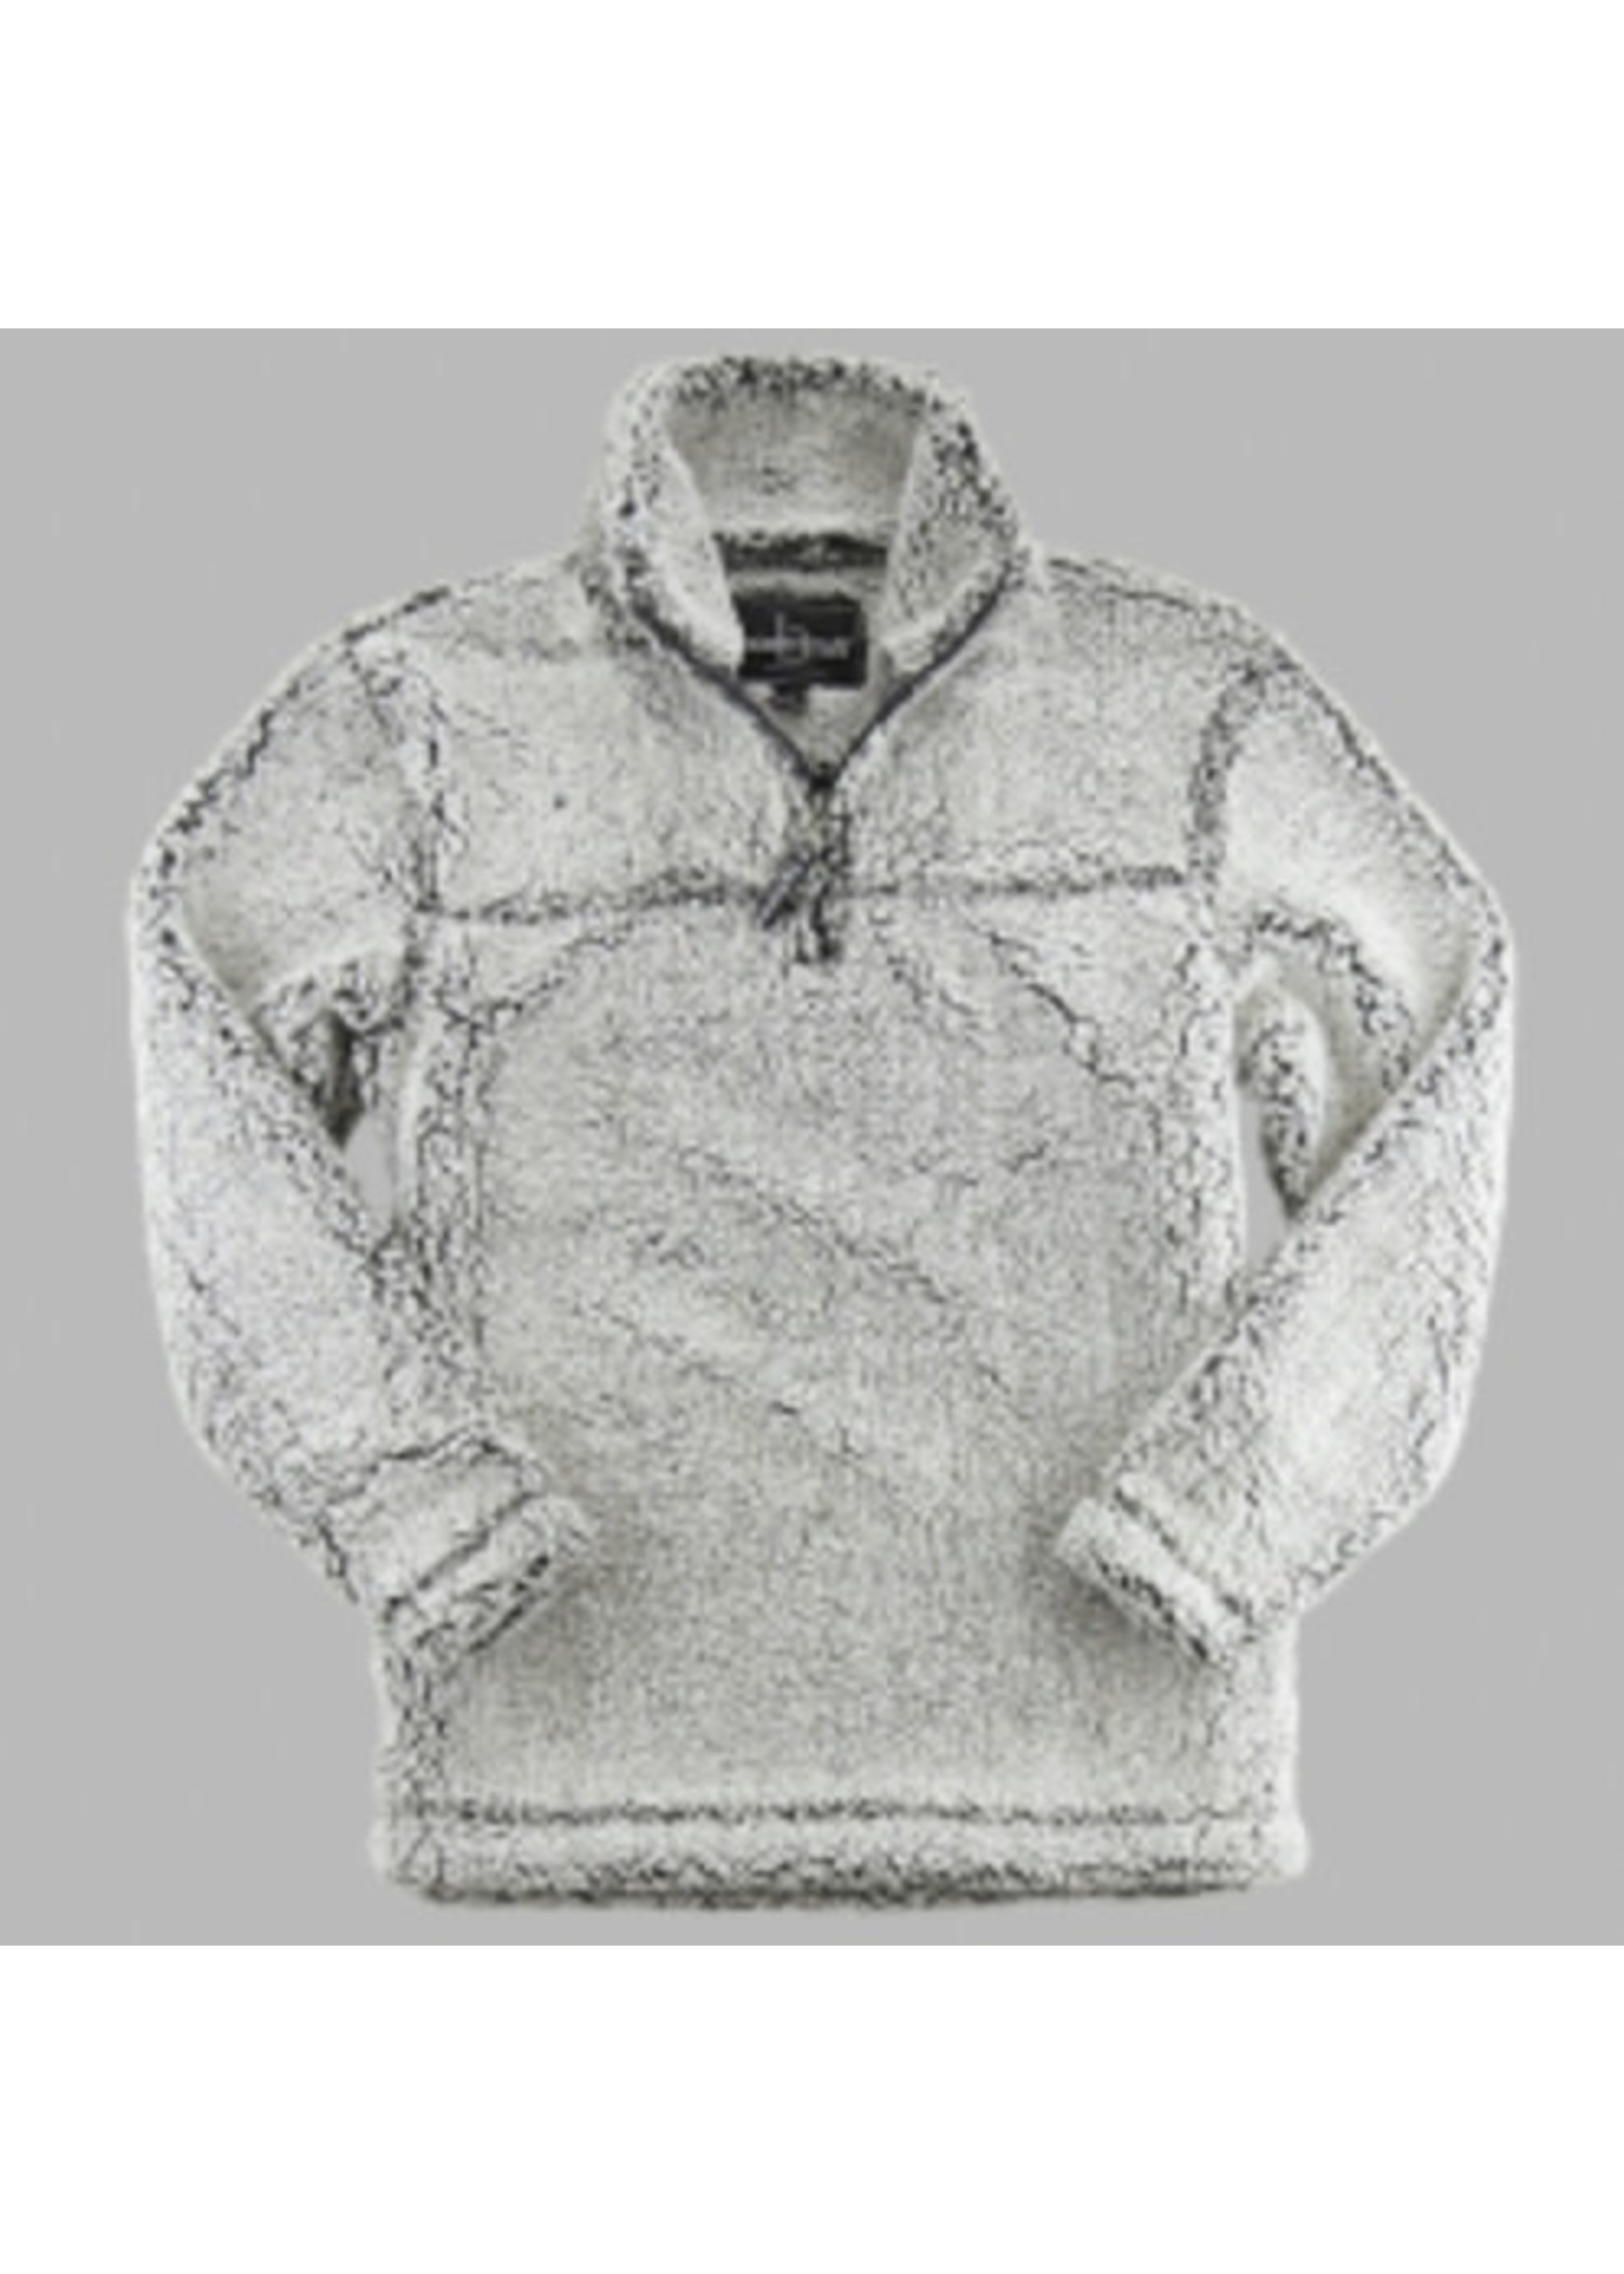 NON-UNIFORM JD Frosty Sherpa Pullover, Unisex 1/4 zip, solid color